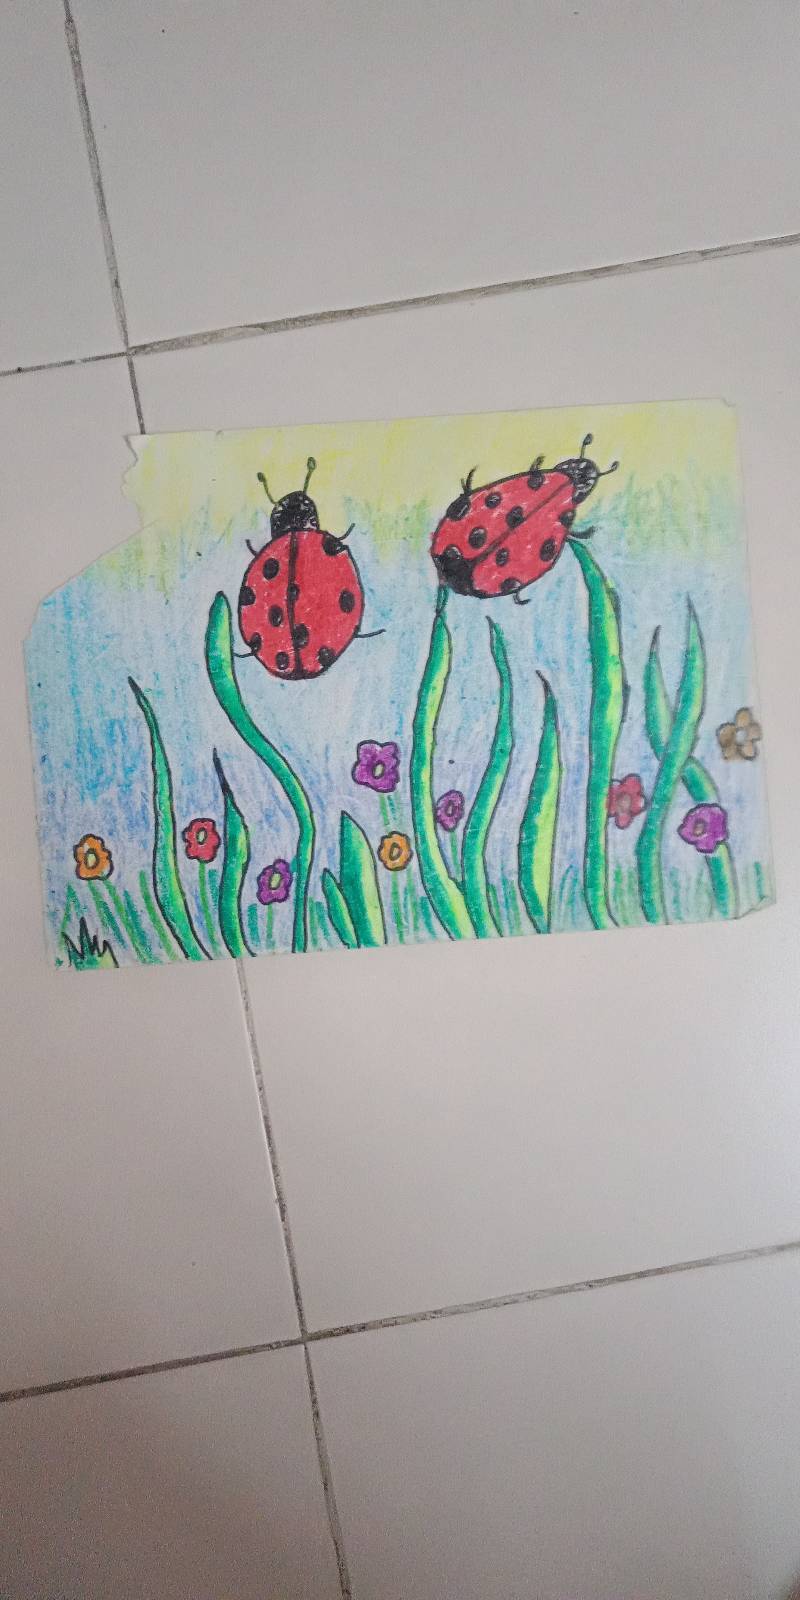 ladybird by anirudh_atharva28 (Pencil, Markers, Oil pastel)